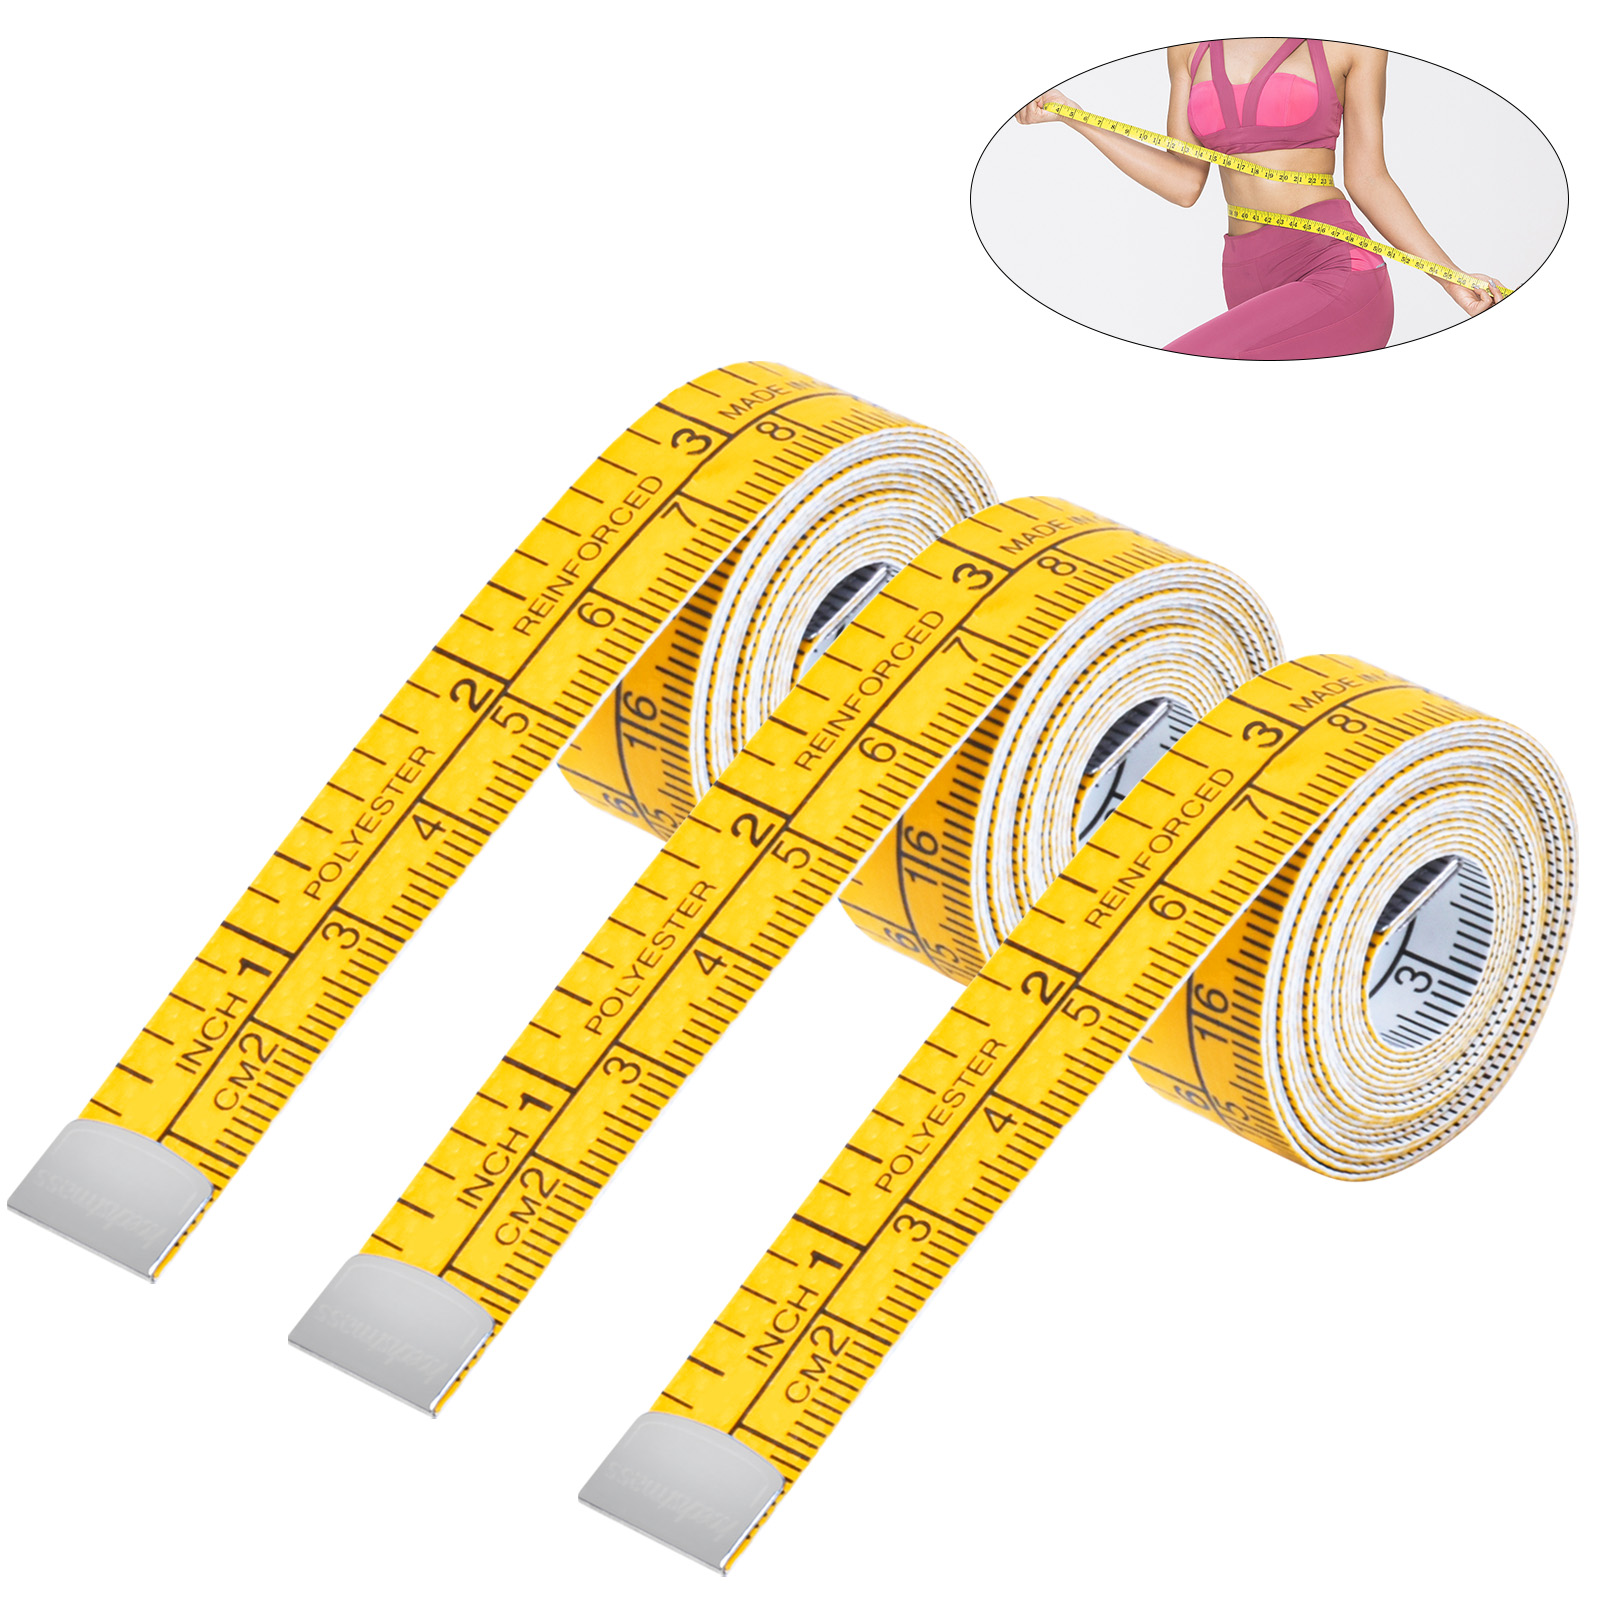  Dual Sided Body Measuring Ruler Sewing Cloth Tailor